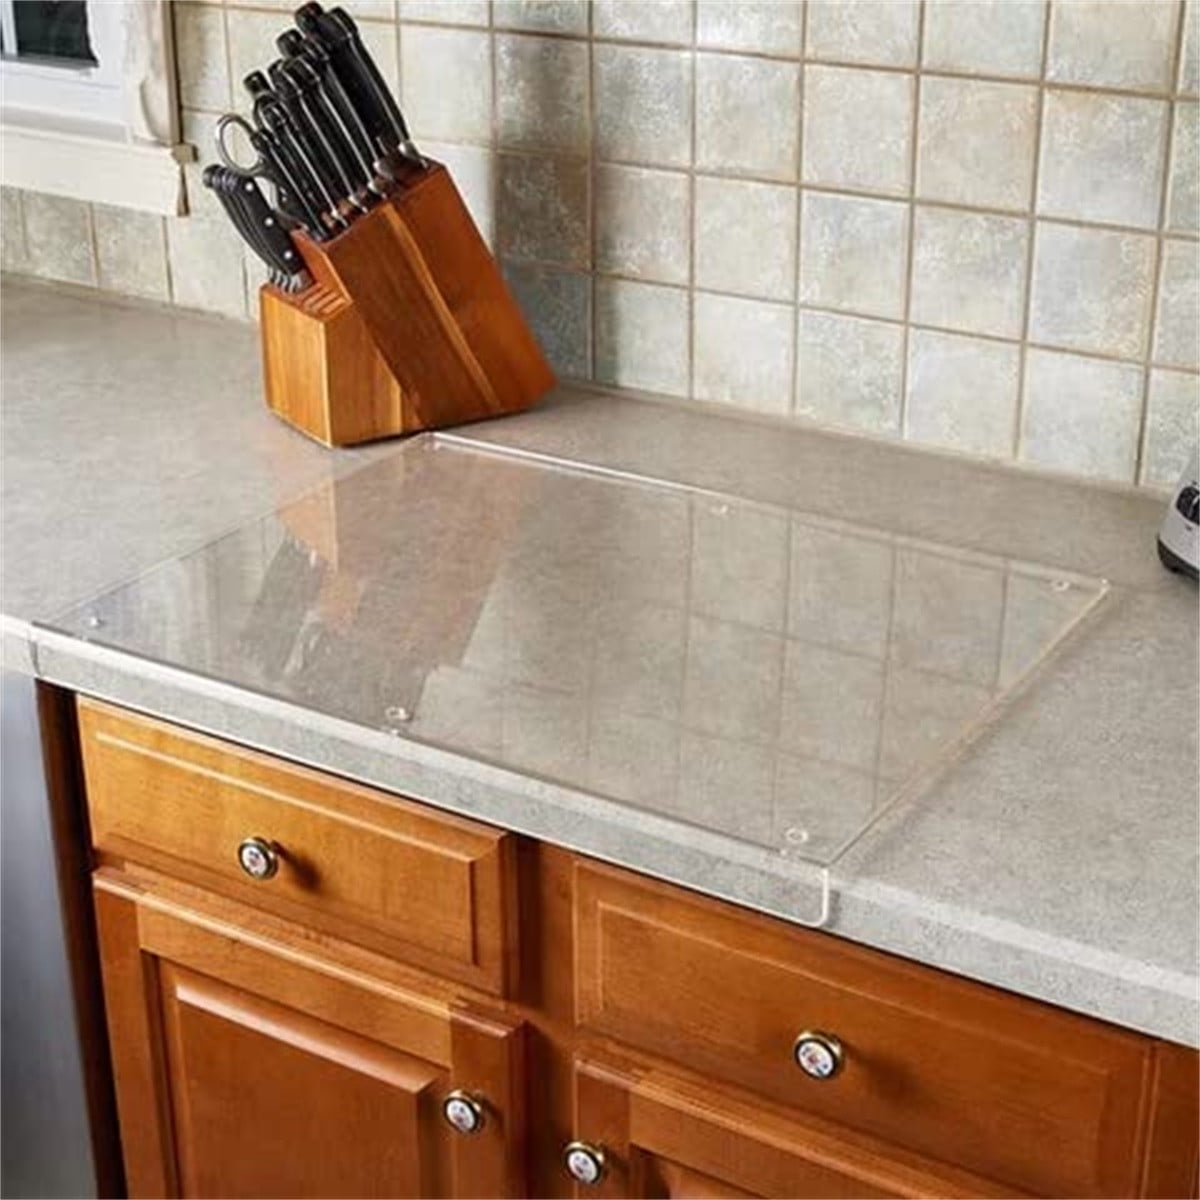 Pompotops 18*16 Inches Kitchen Countertop With Acrylic Cutting